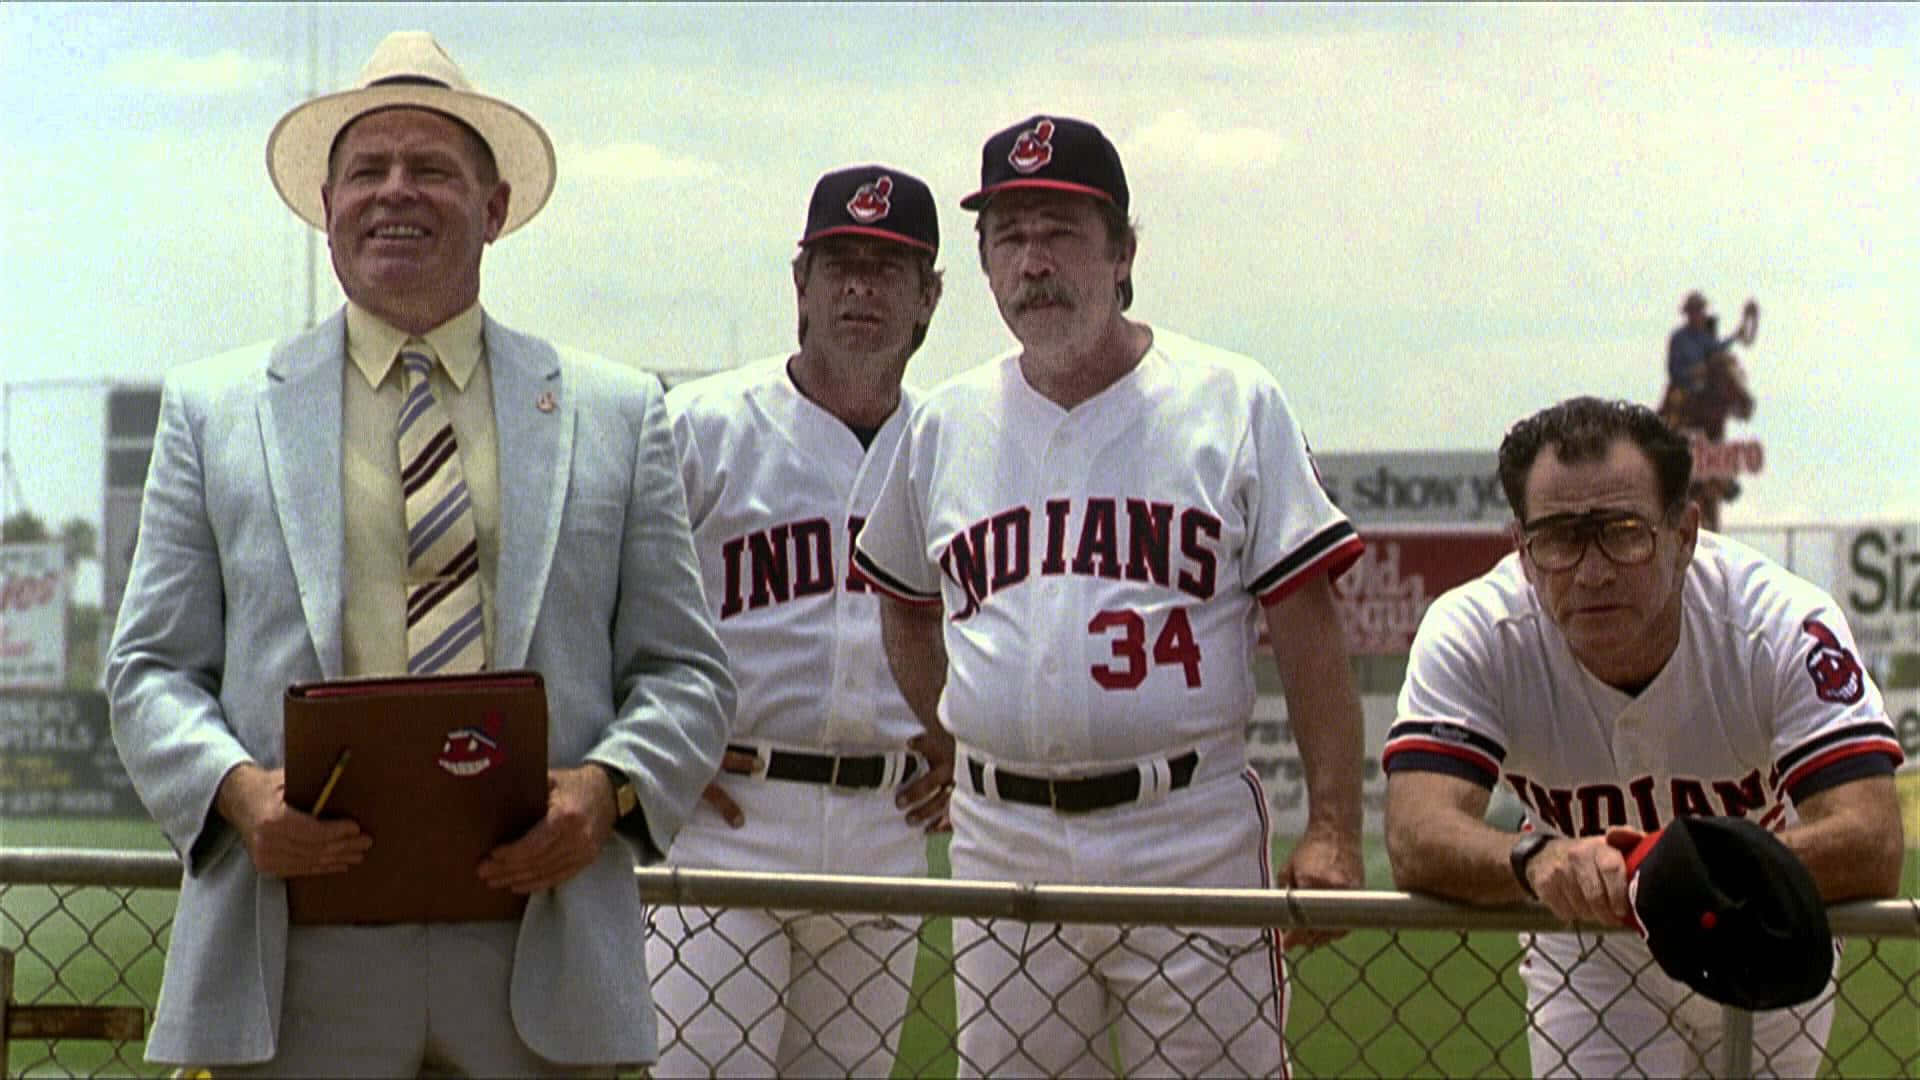 Major League Movie Poster featuring the main cast Wallpaper